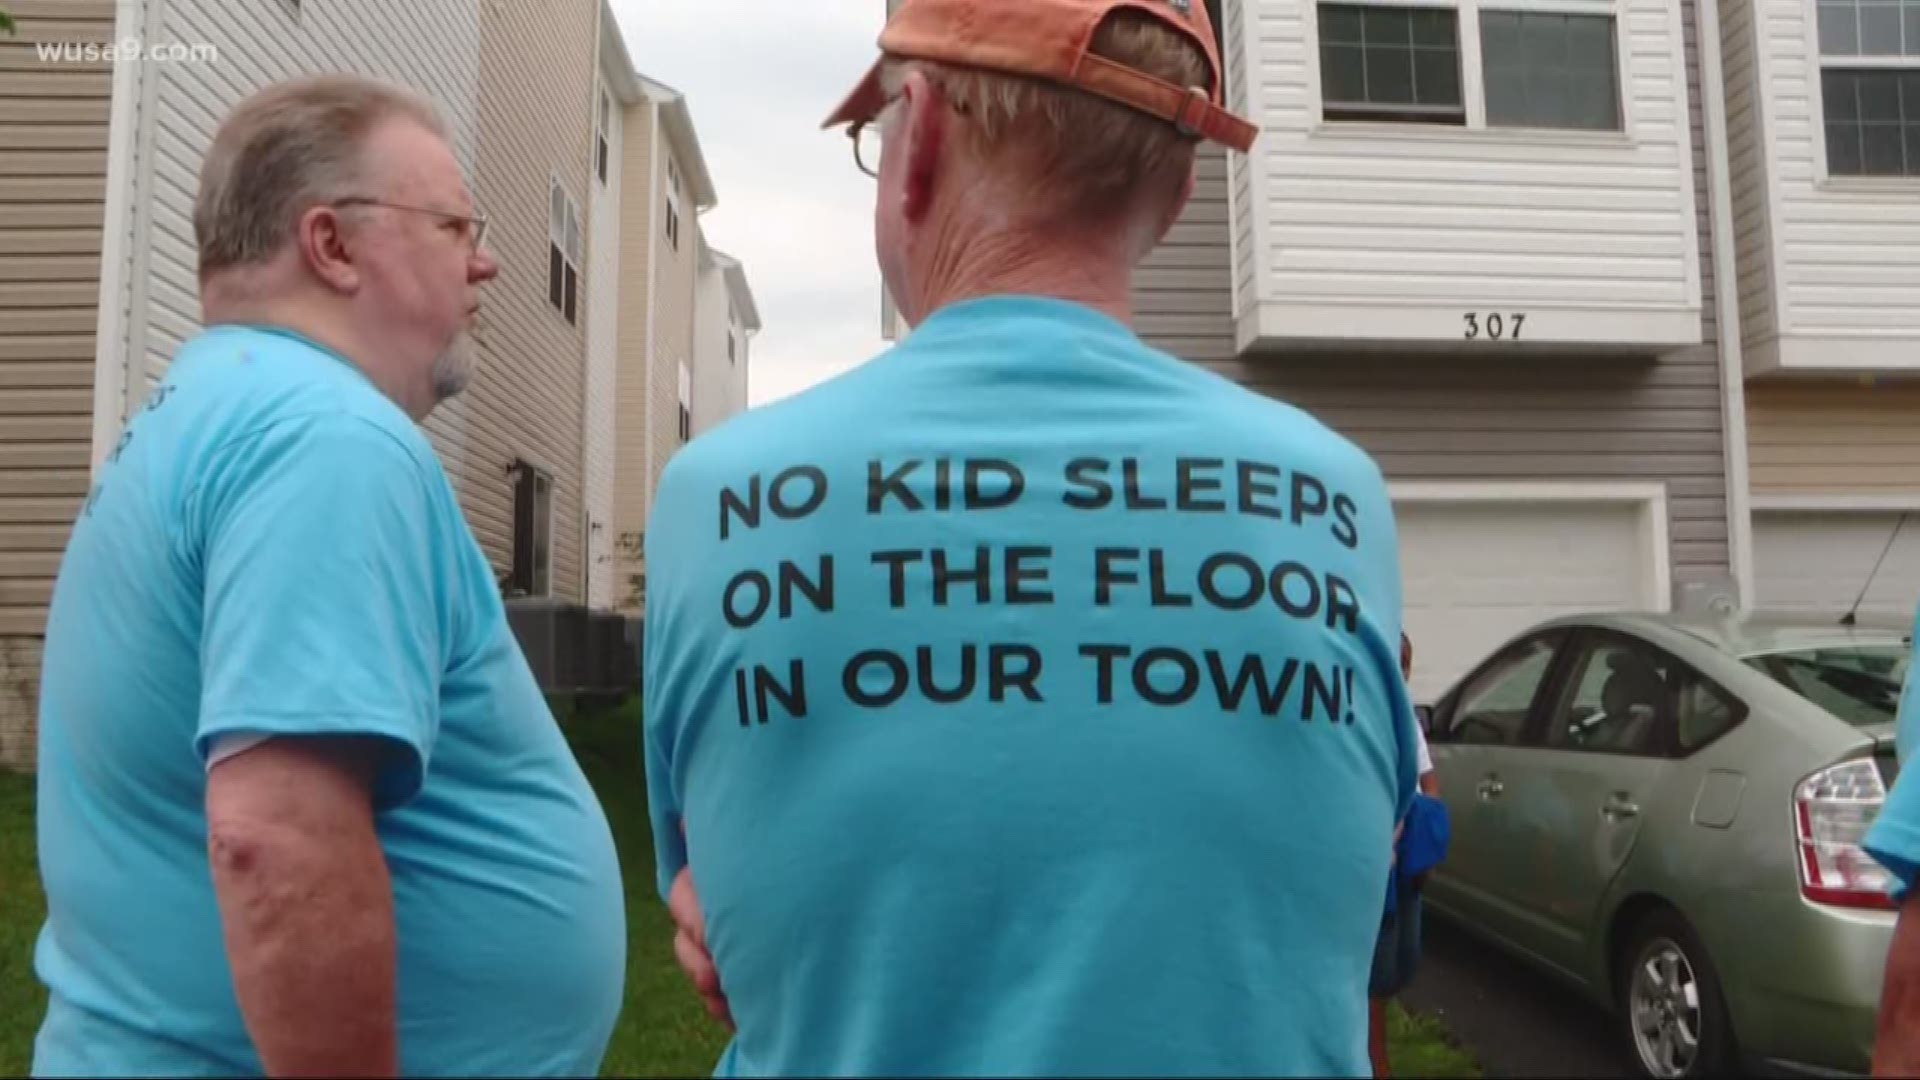 The charity Sleep in Heavenly Peace has a motto: "No kid in our town sleeps on the floor."